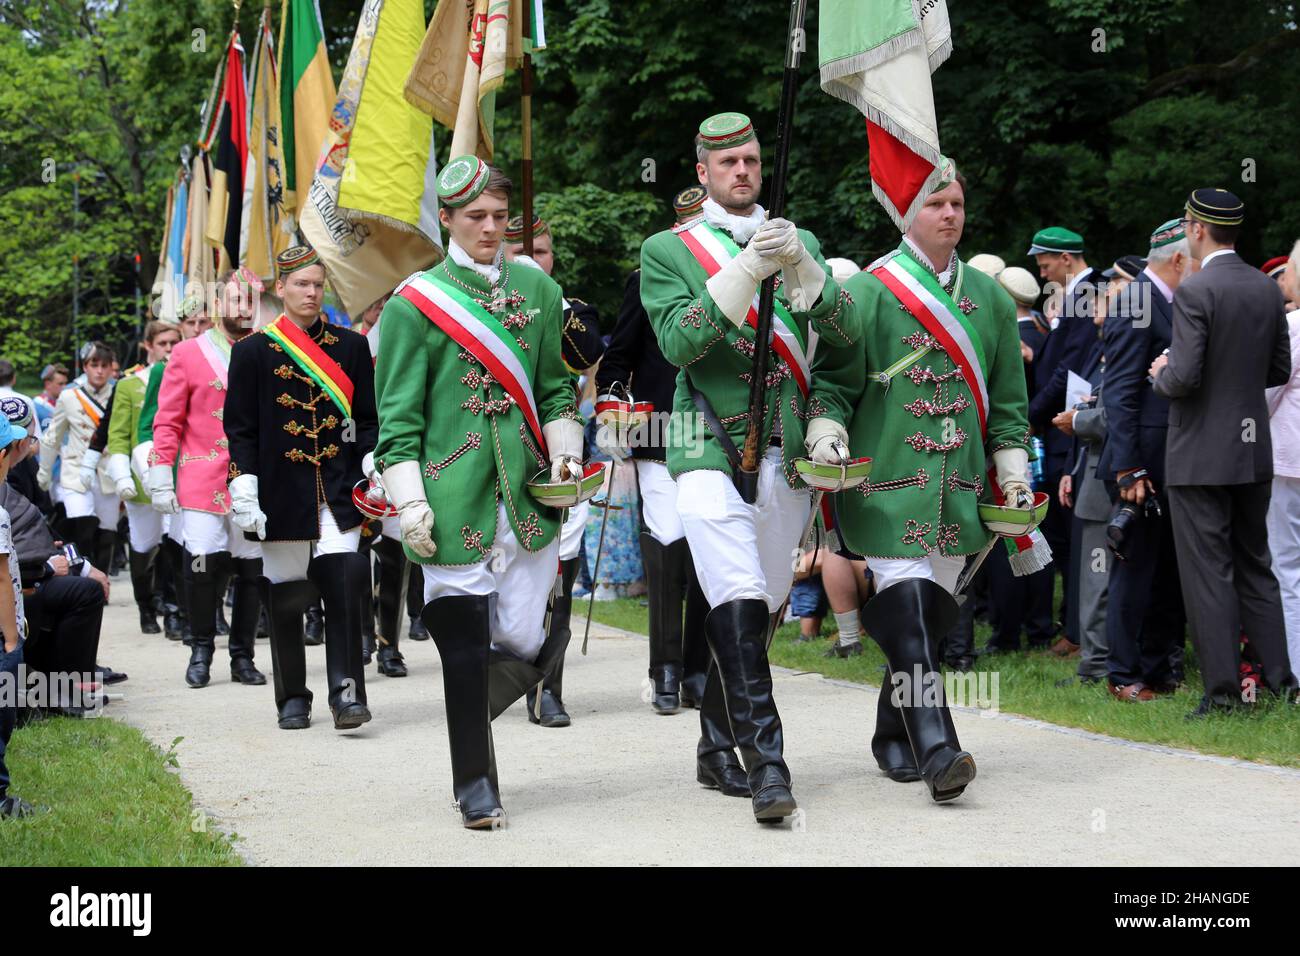 The 151st Coburg Covent is underway this weekend in Coburg Germany. The annual occasion sees the gathering of many students associations from around t Stock Photo